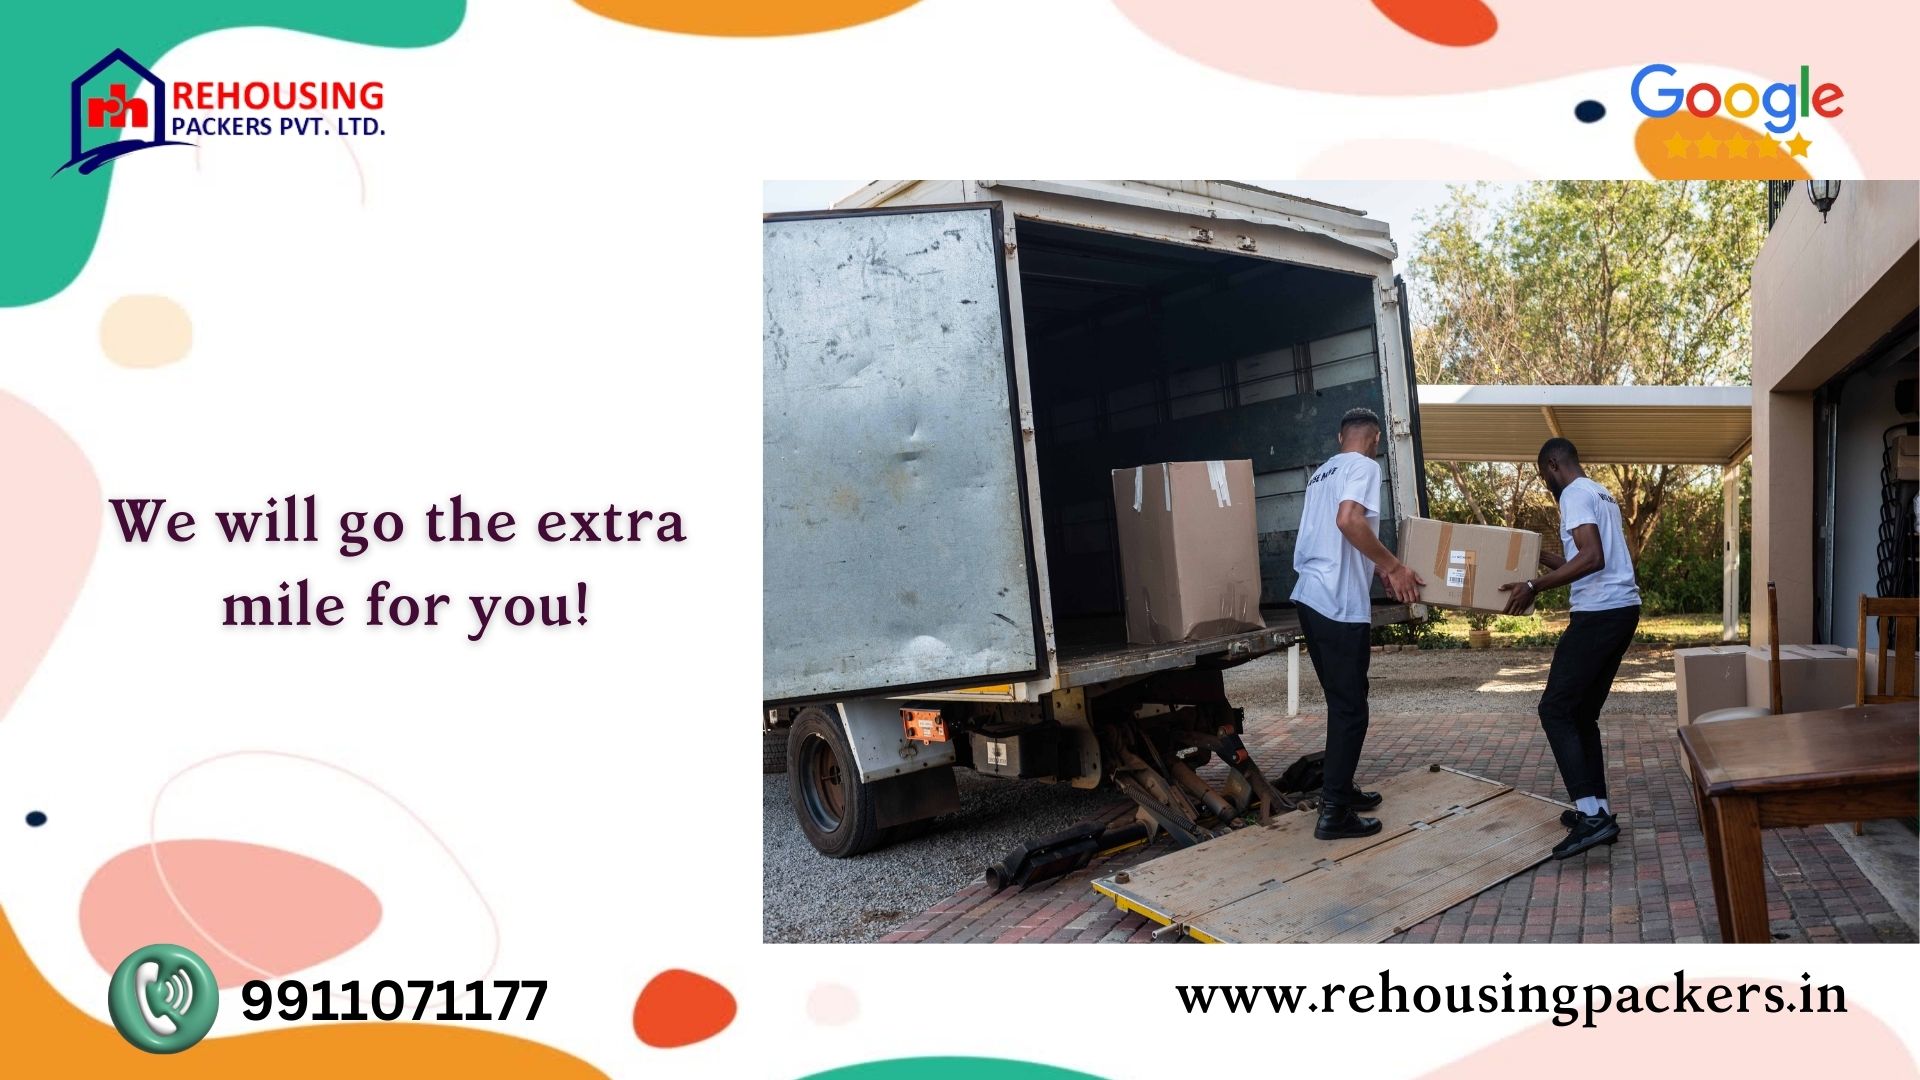 our courier services from Hyderabad to Chandigarh